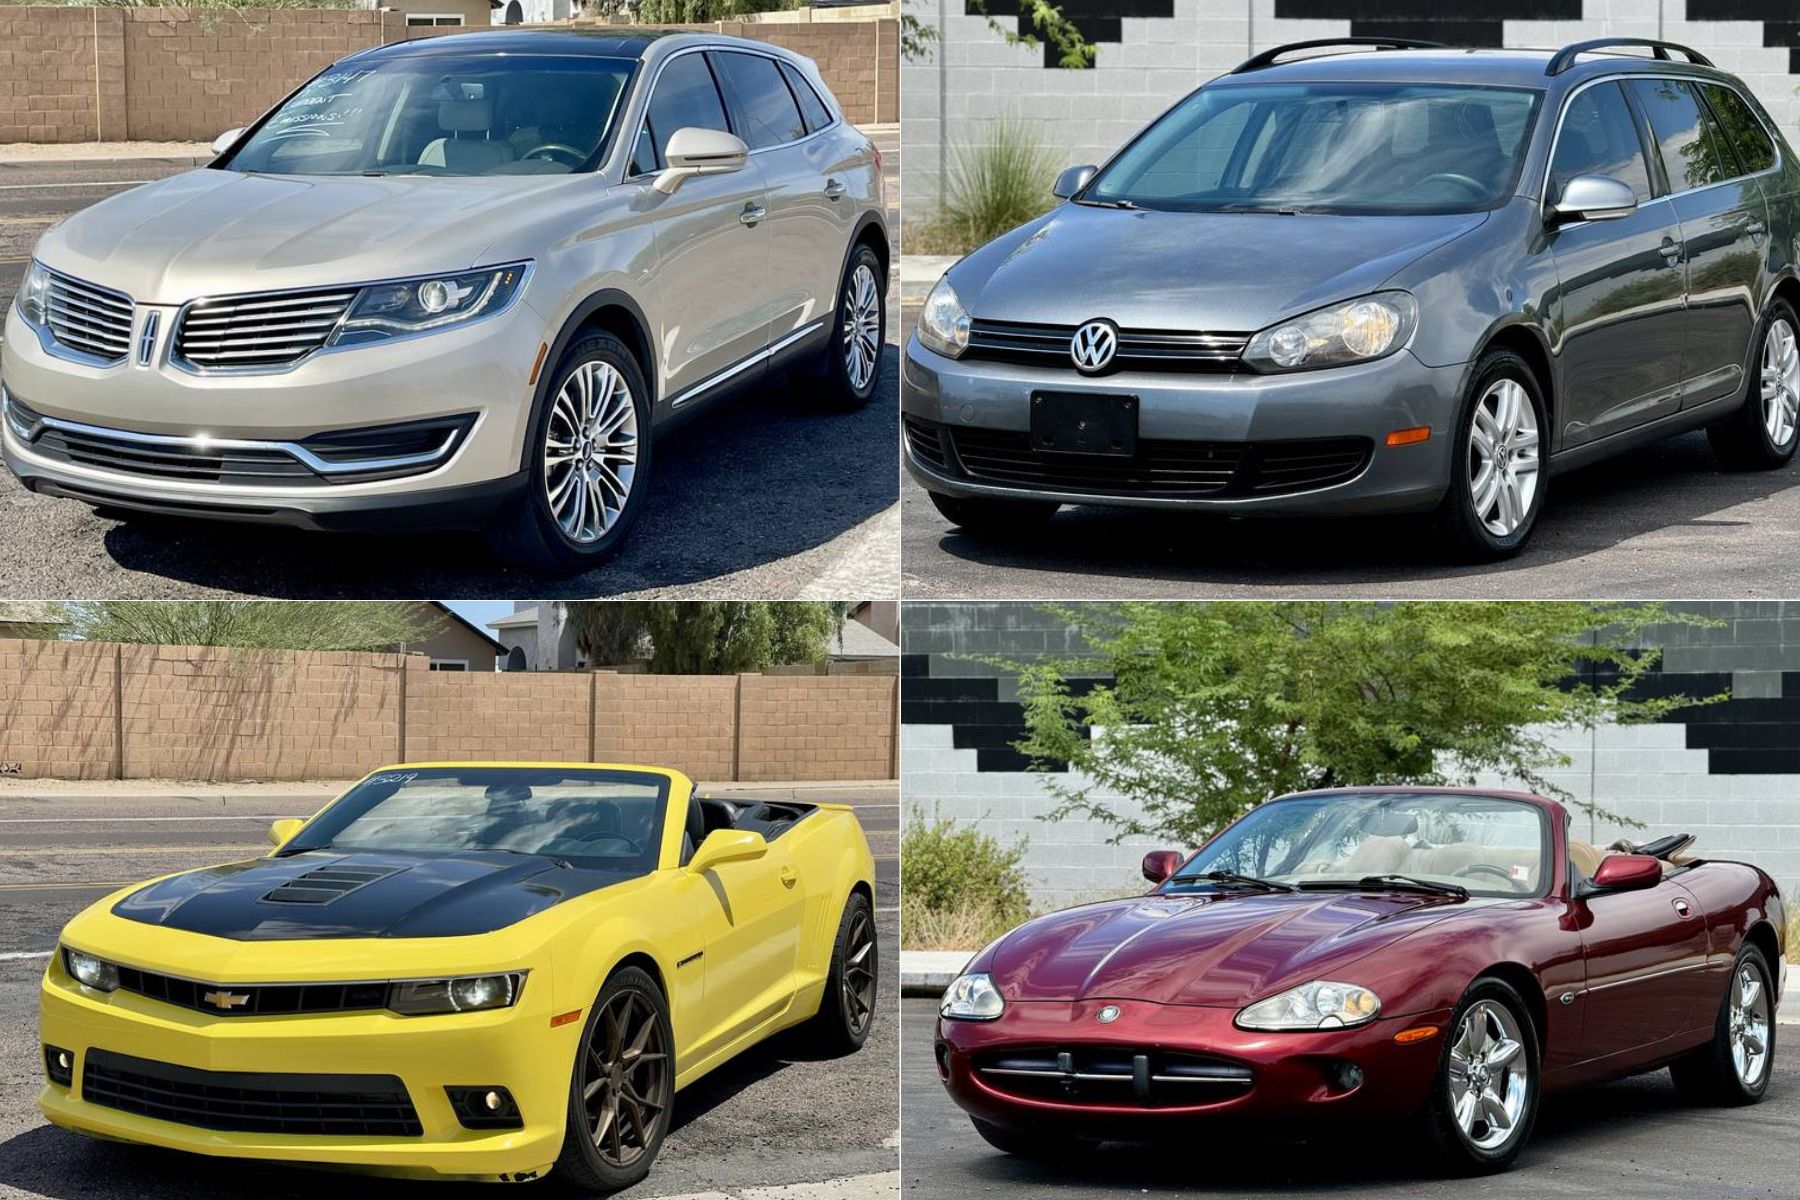 Four cars at the Auction Yard: beige Lincoln MKX, gray VW Jetta SportWagen, yellow Chevy Camaro convertible, maroon Jaguar XK convertible.